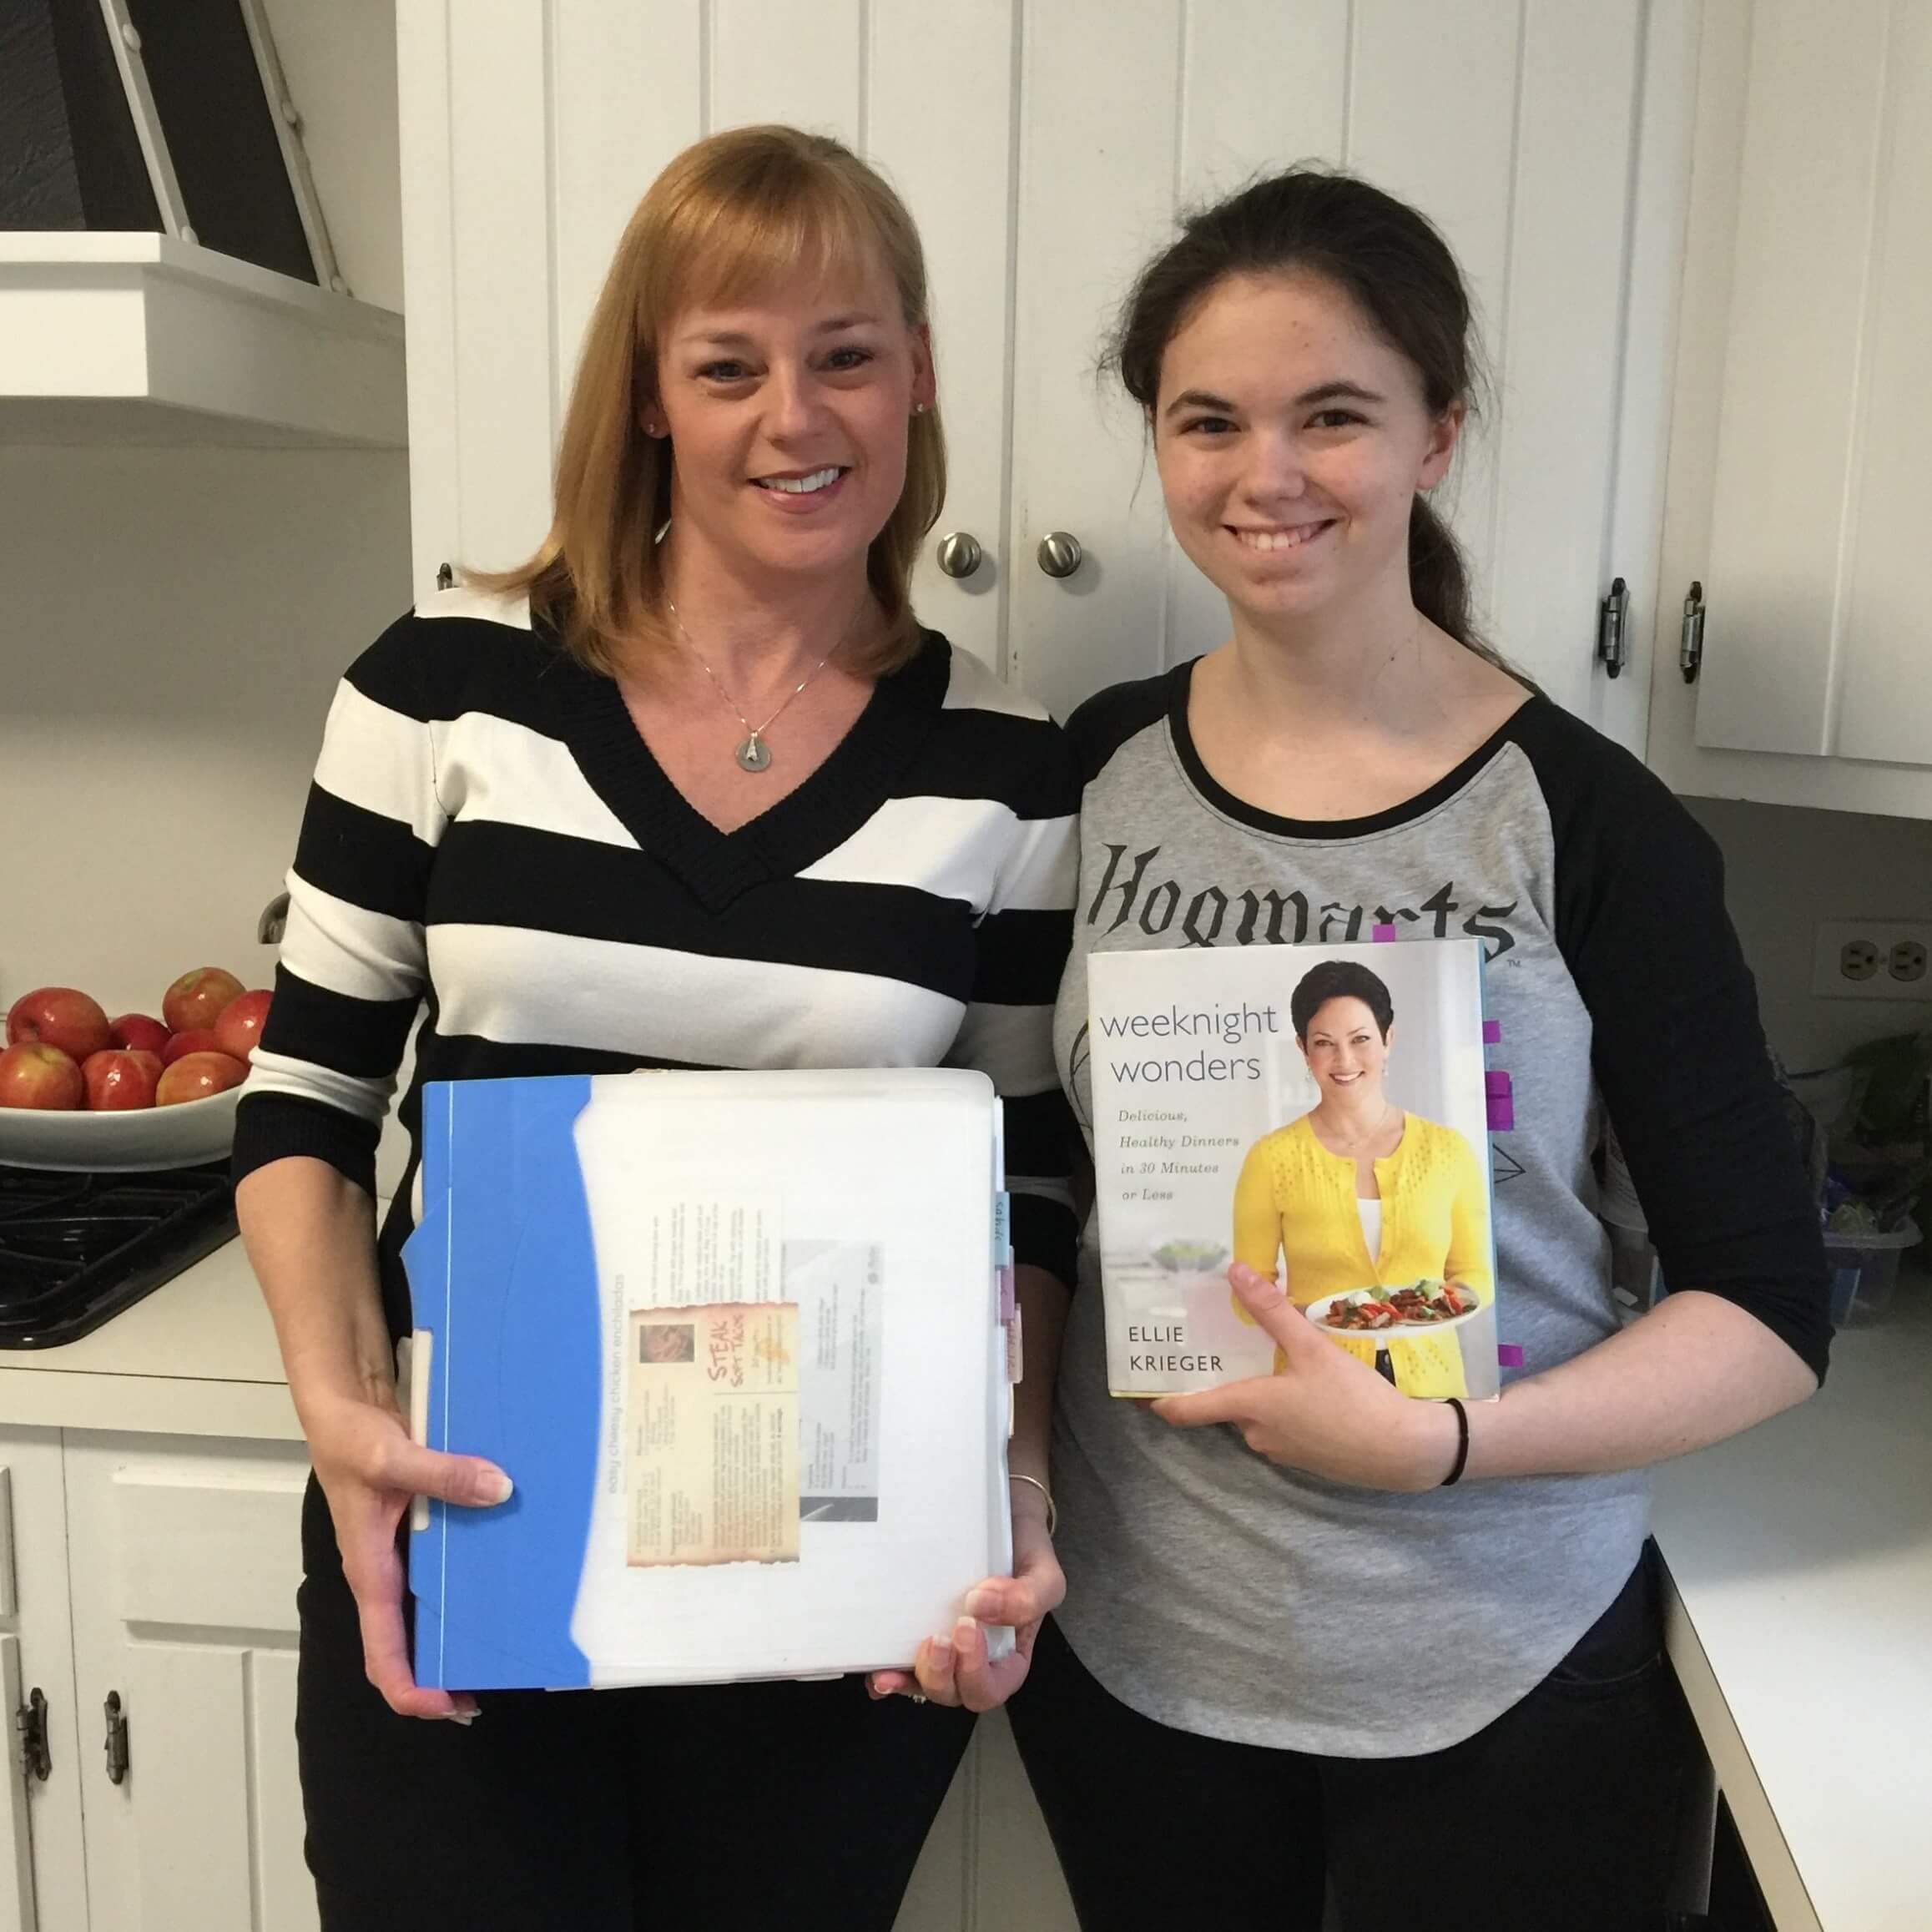 Melissa with the "ginormous" binder and Sarah with Ellie Krieger's Weeknight Wonders Cookbook